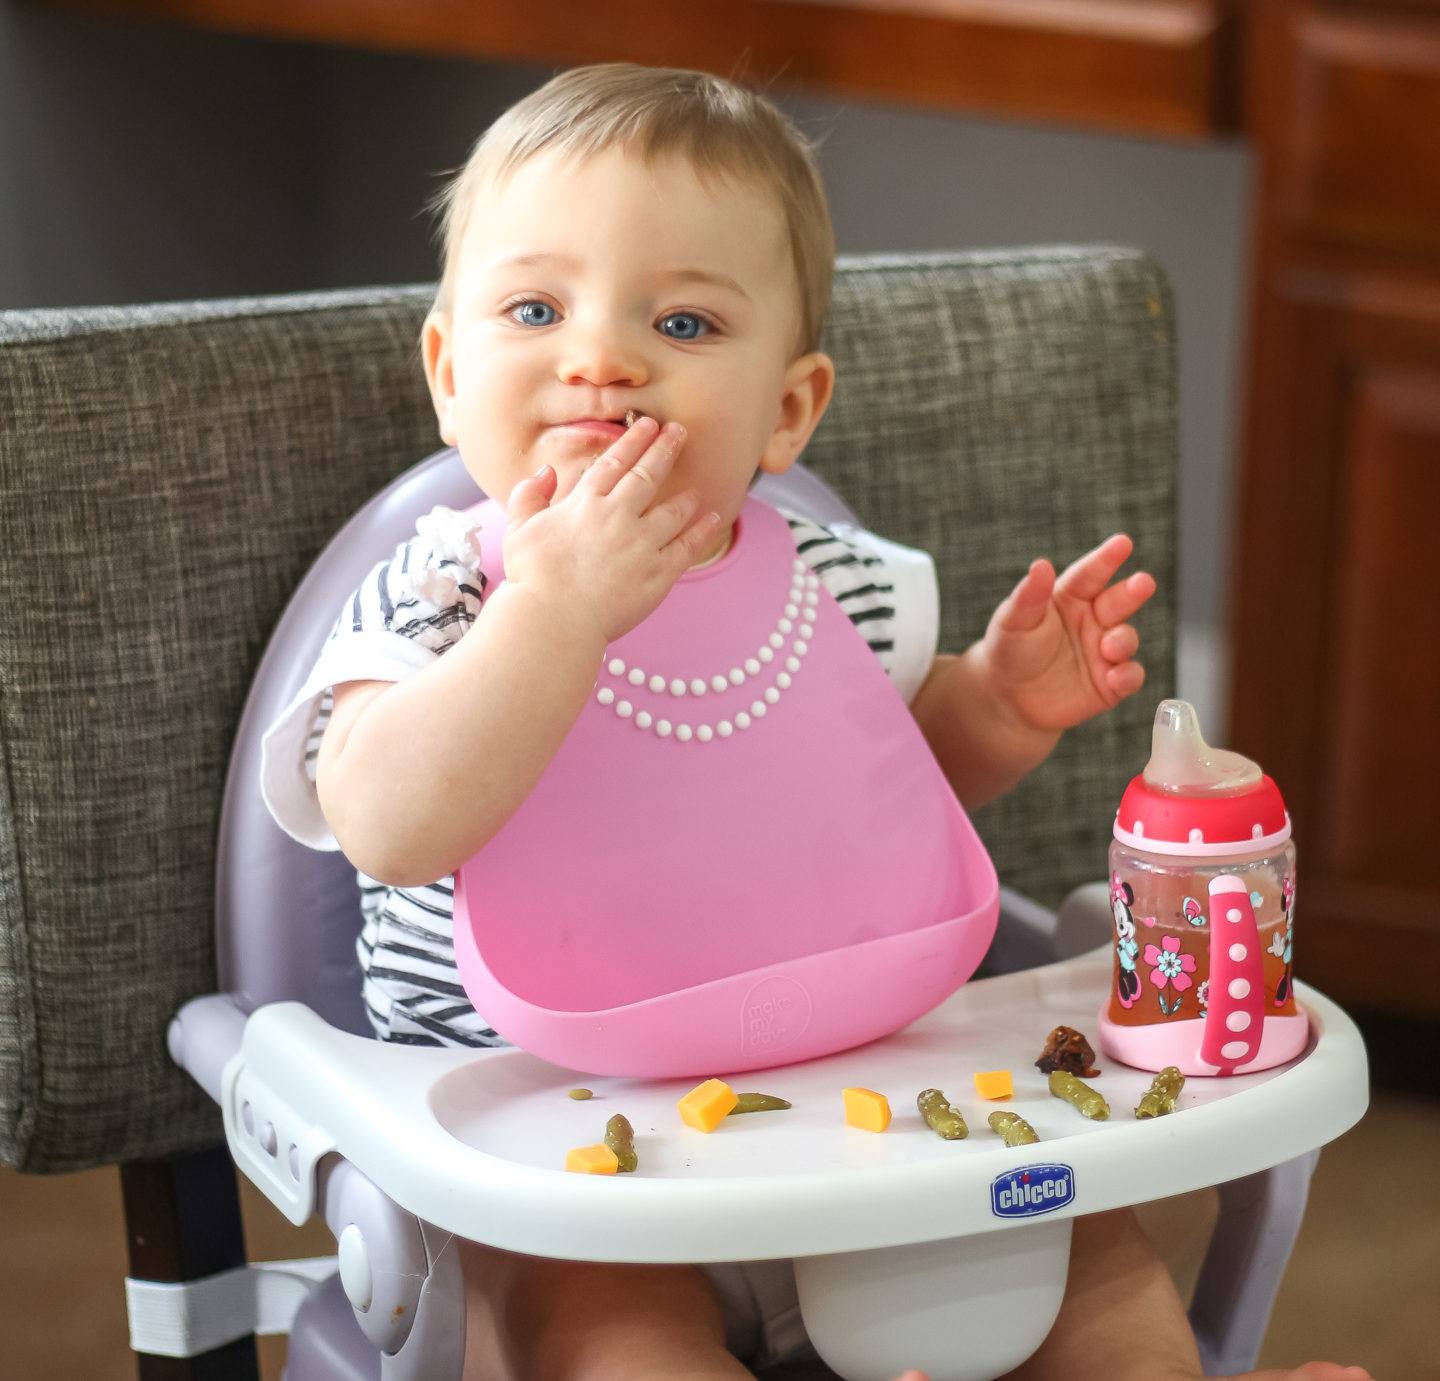 3 Easy Meal Ideas for 9-12 Month Old Babies